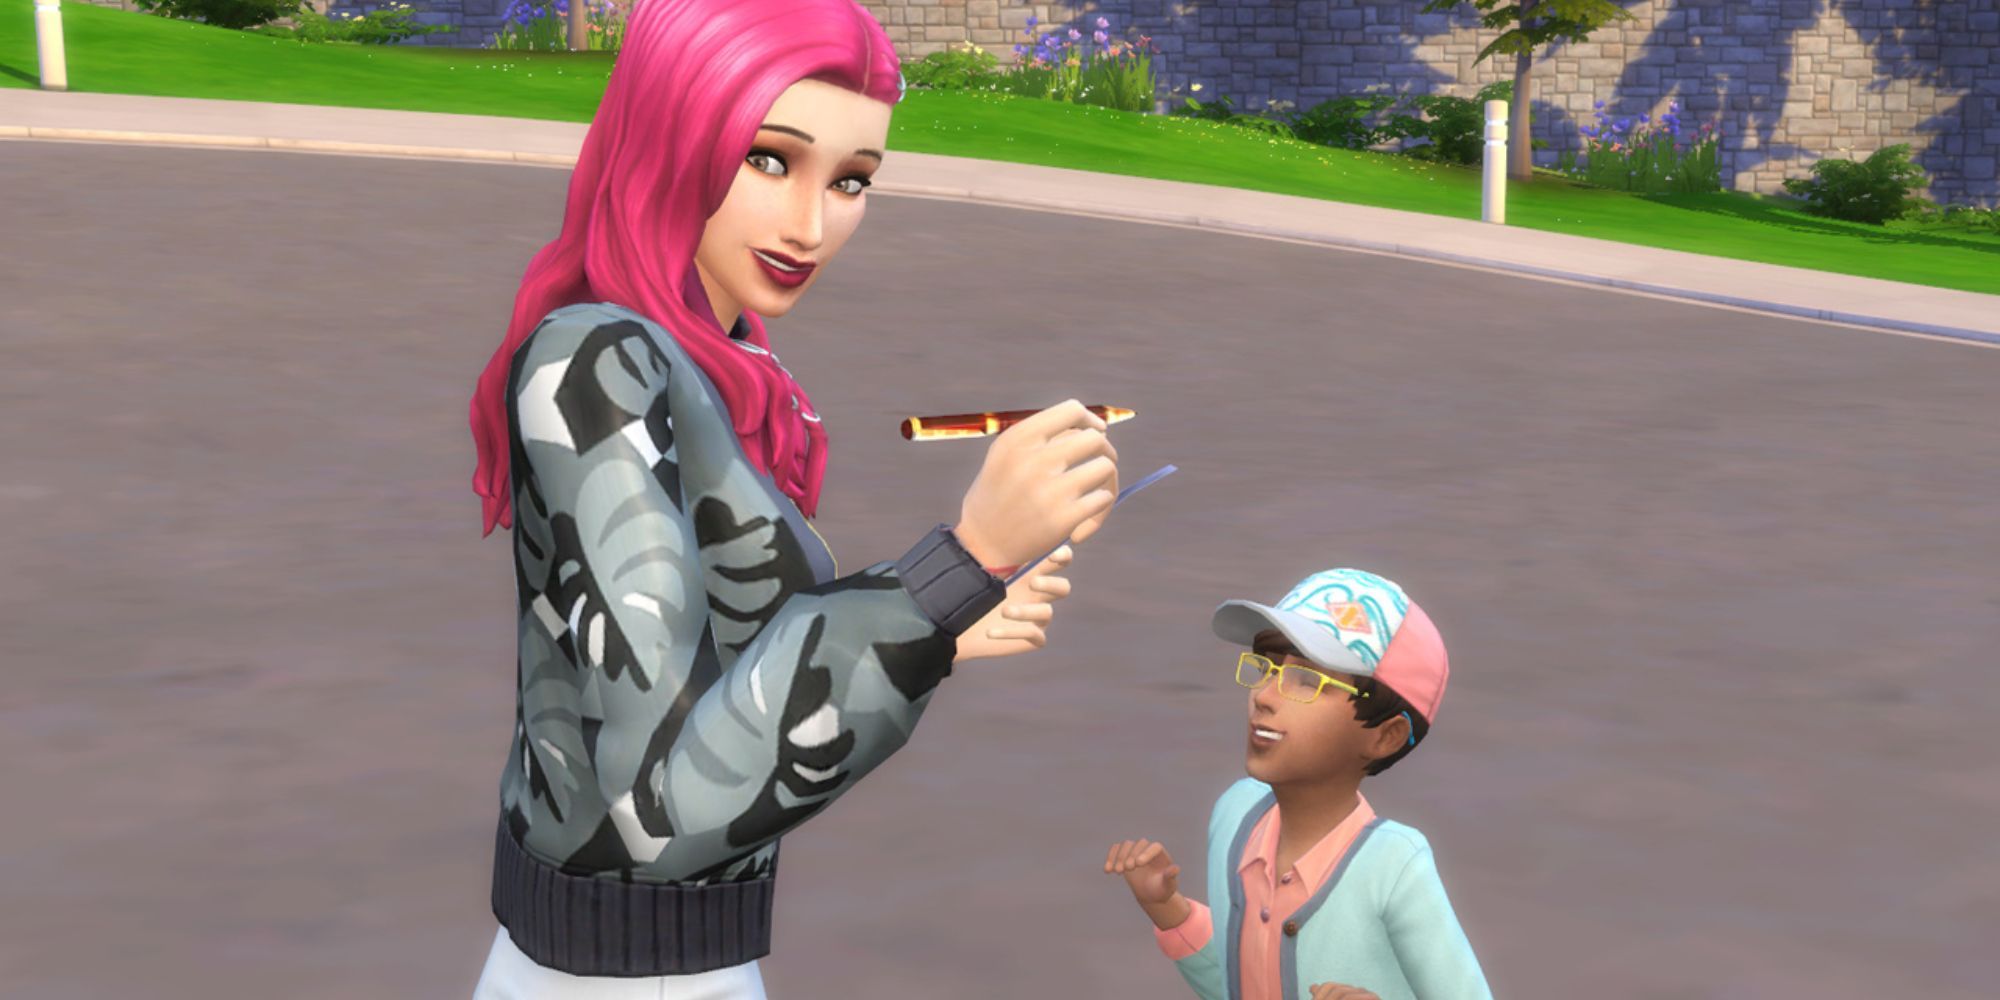 The Sims 4 Sim Signing Autograph